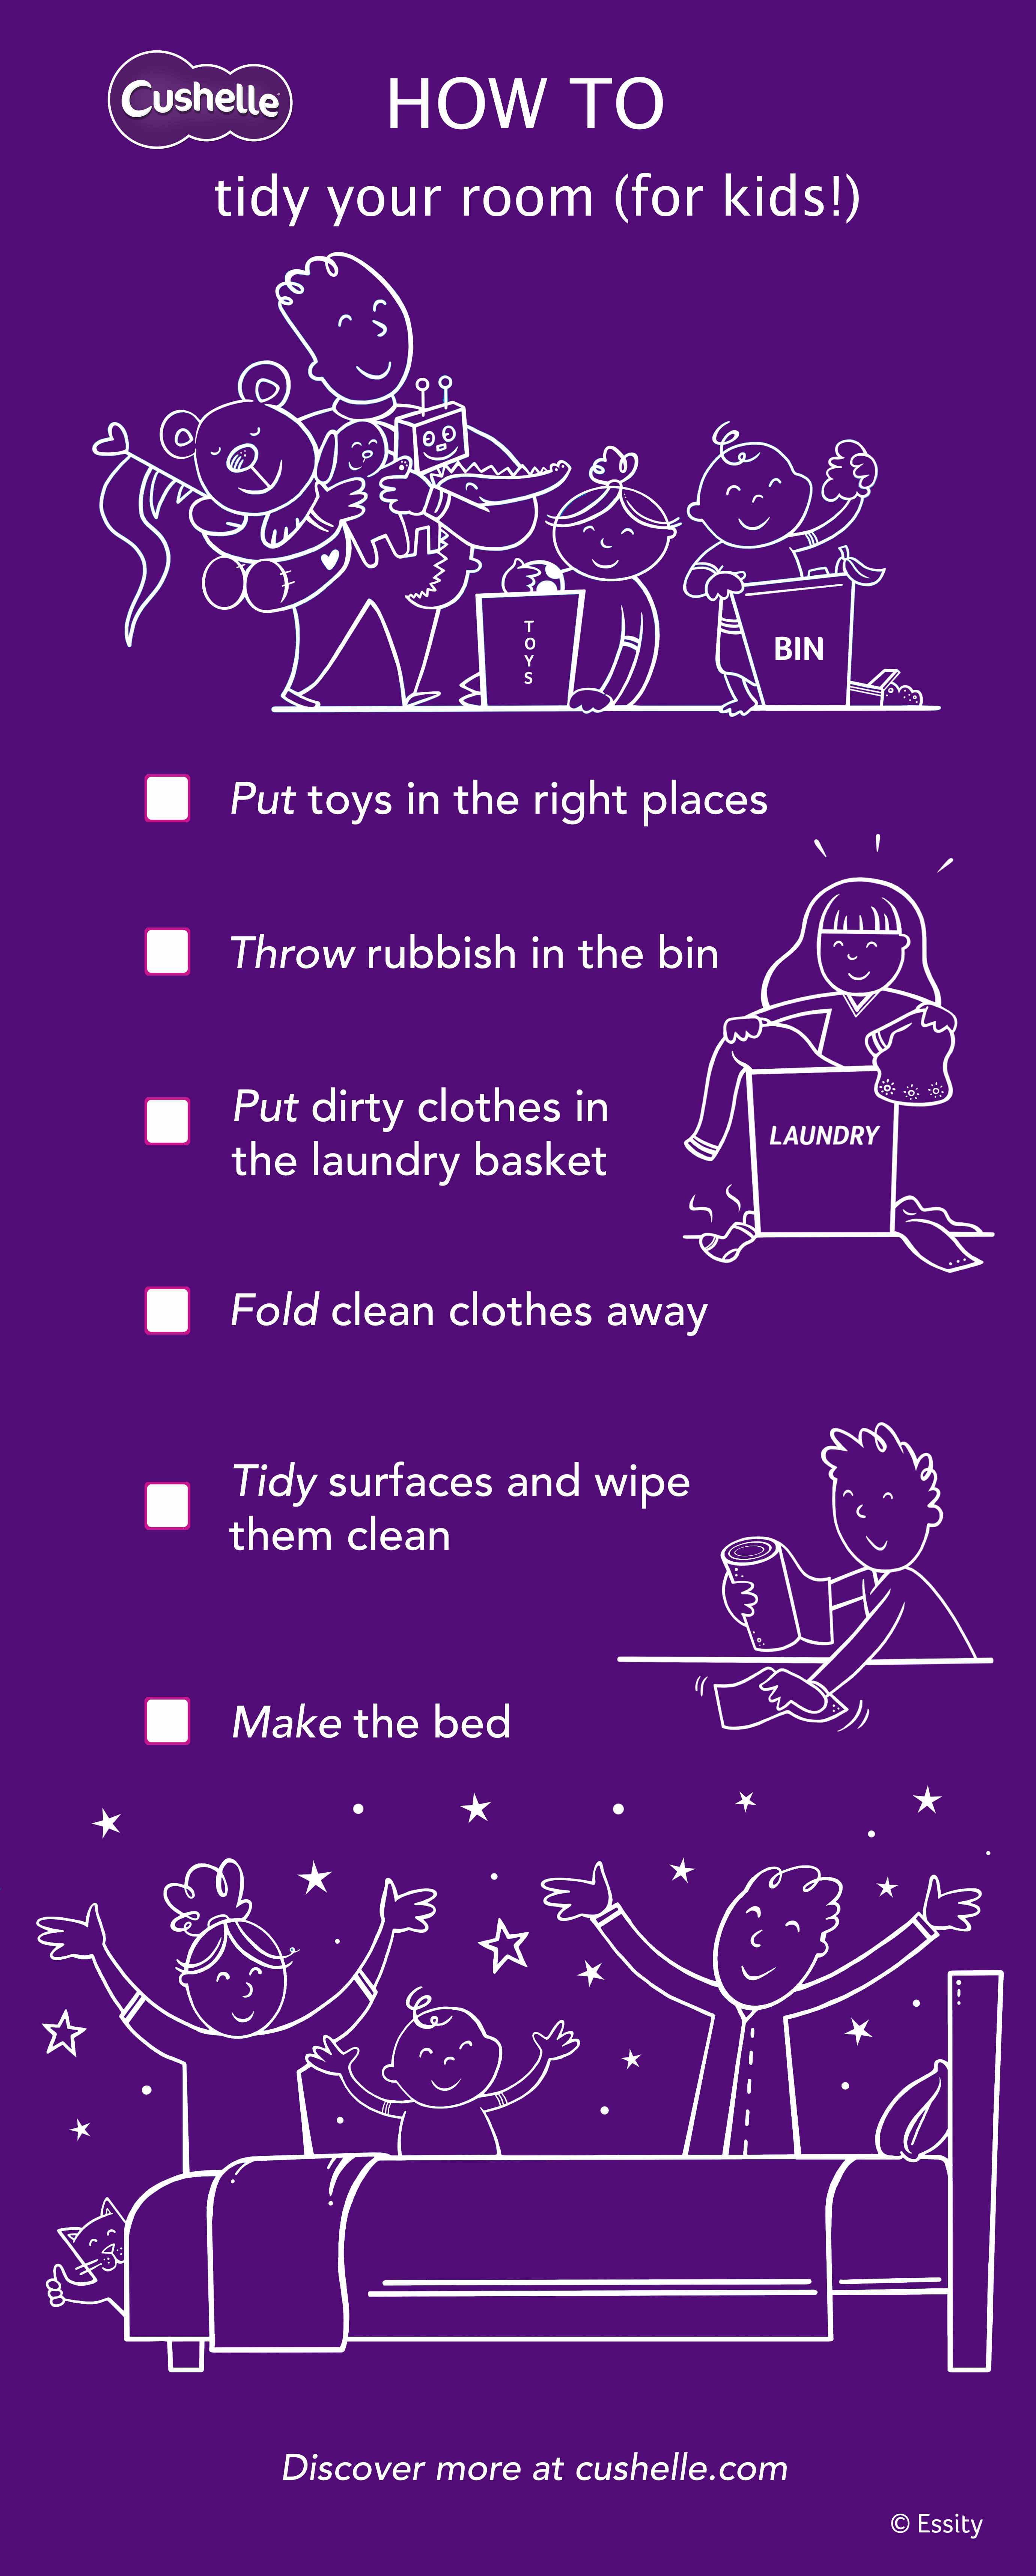 How to Tidy Your Room – Without Getting Bored! - Cushelle